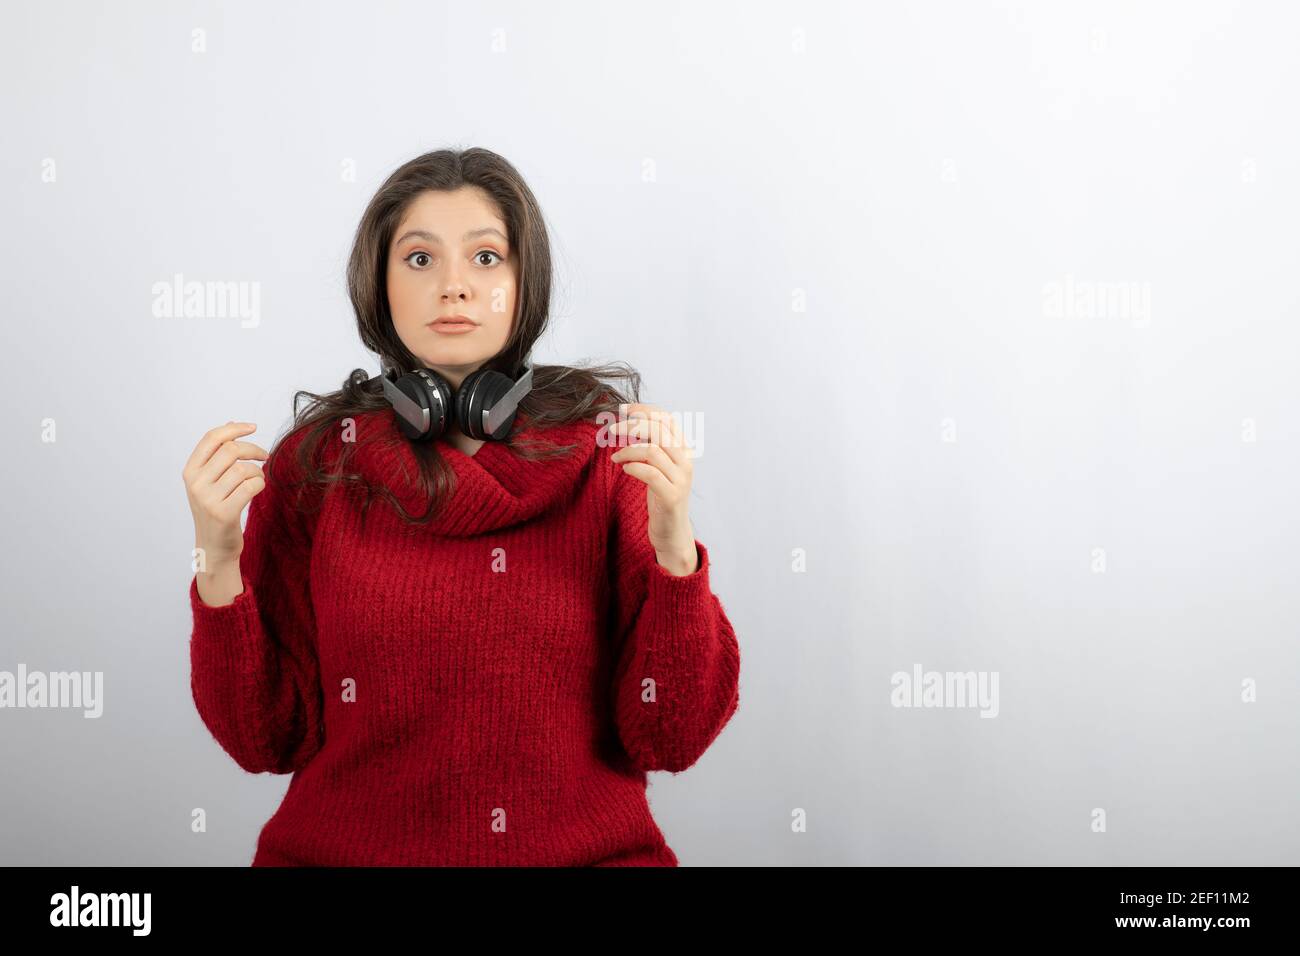 Photo of a young woman in red sweater wearing headphones on neck Stock Photo